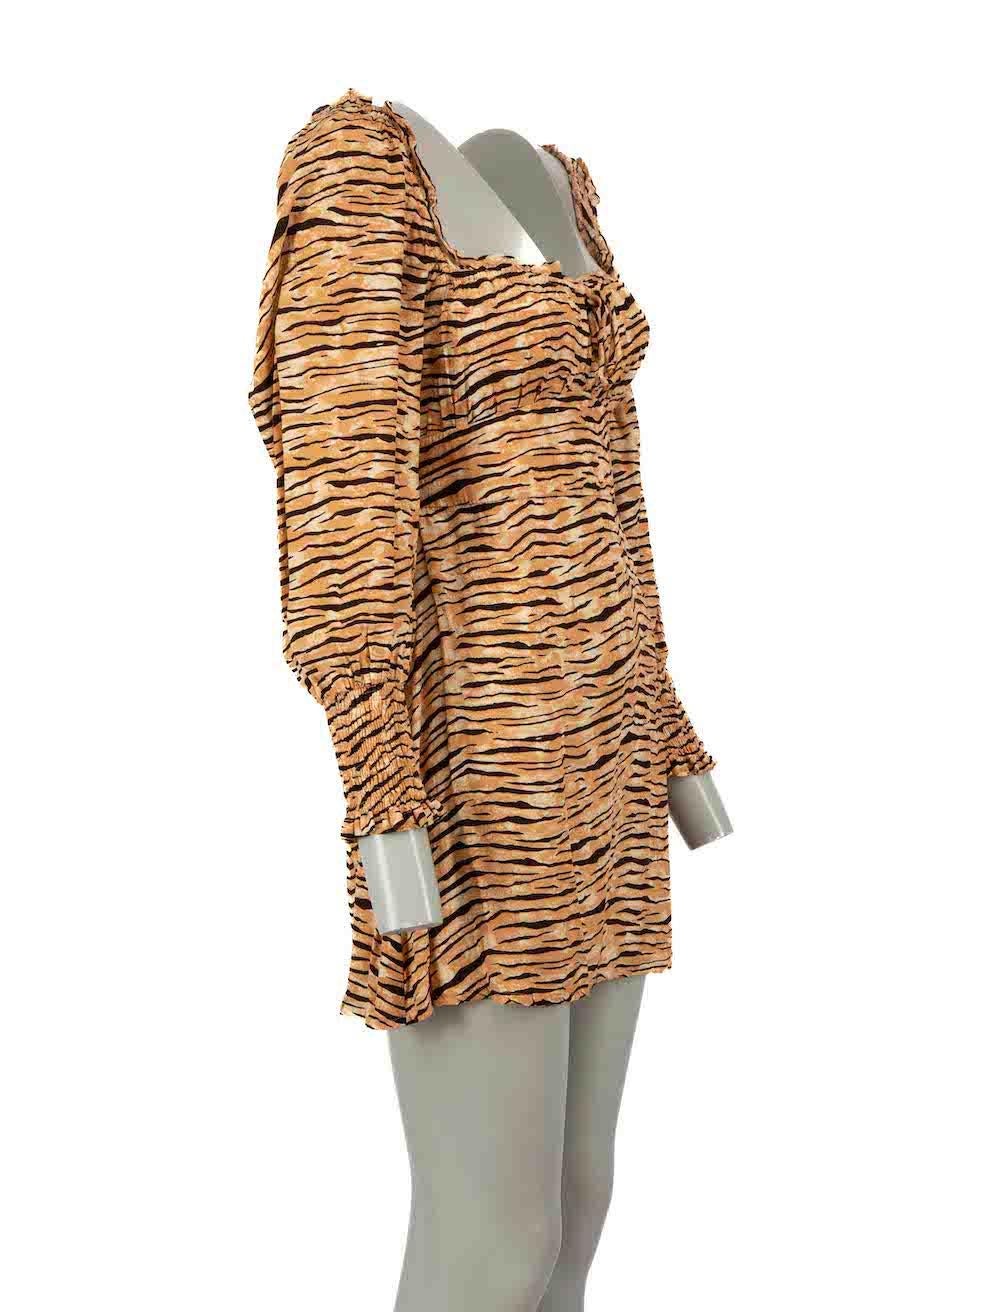 CONDITION is Very good. Hardly any visible wear to dress is evident on this used Faithfull the Brand designer resale item.

Details
Brown
Viscose
Dress
Animal print
Off-the-Shoulder
Mini
Long sleeves
Side zip fastening
 
Made in Indonesia
